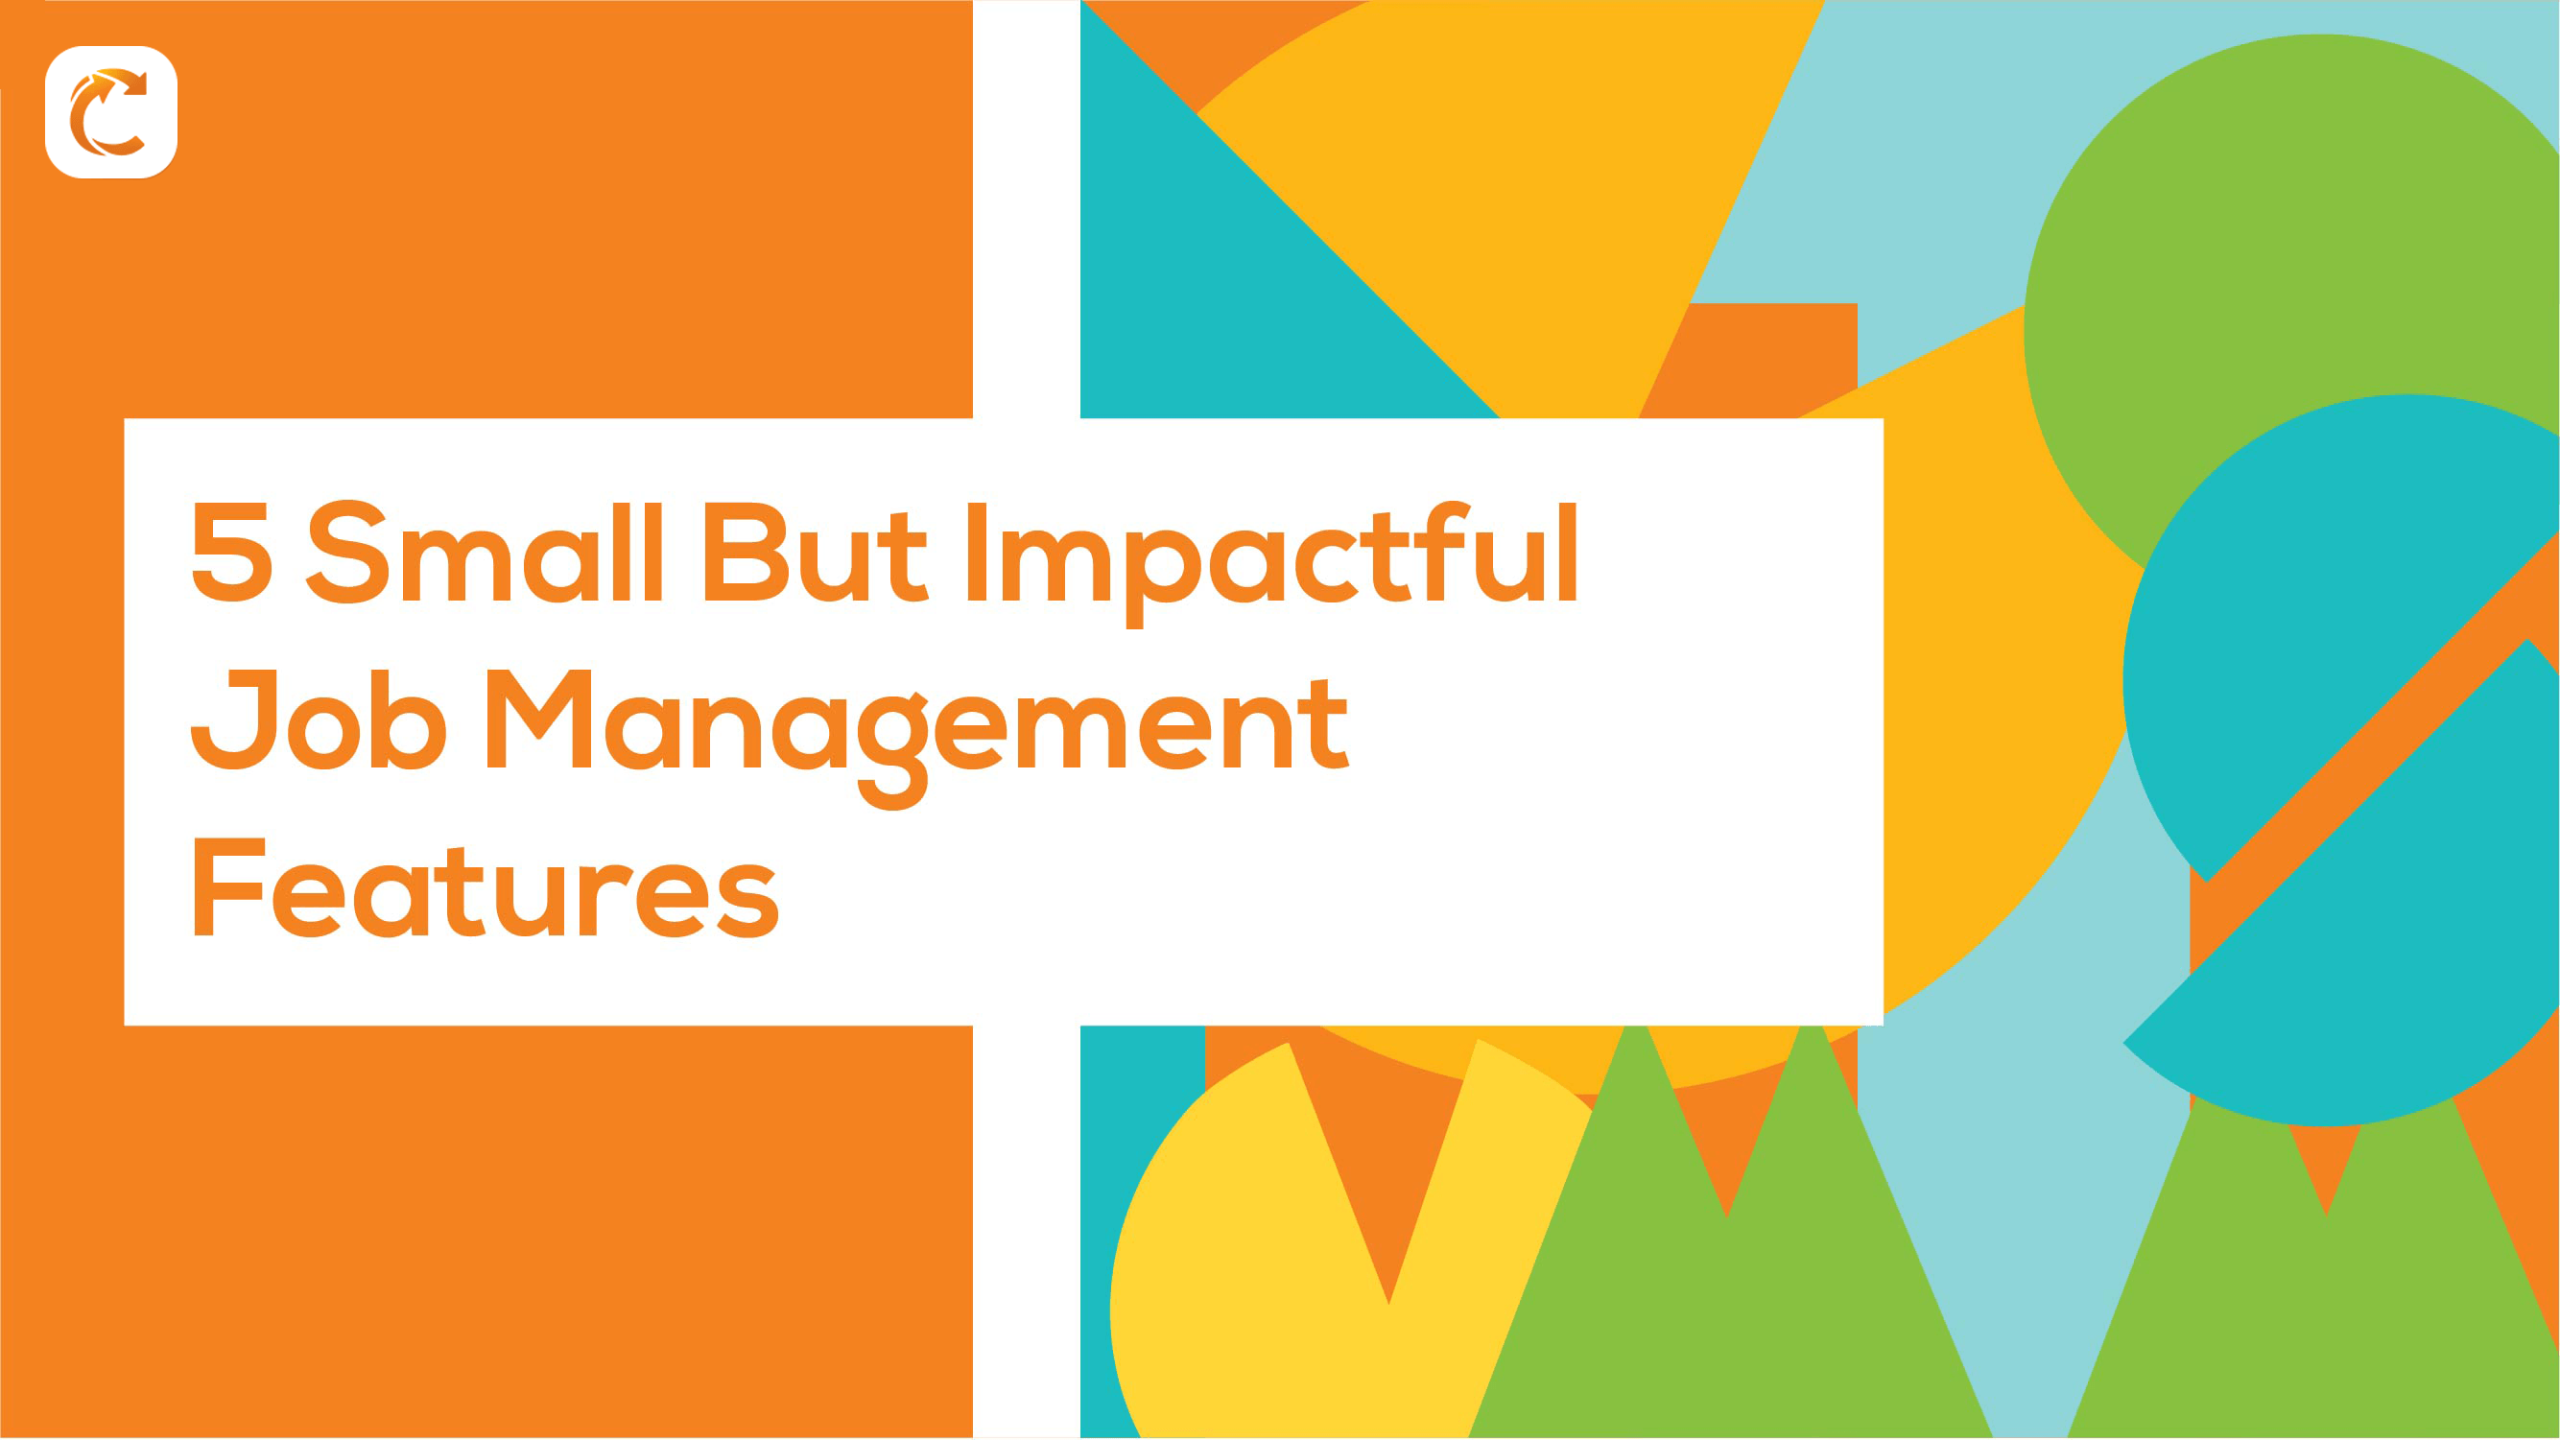 5 Small But Impactful Commusoft Features